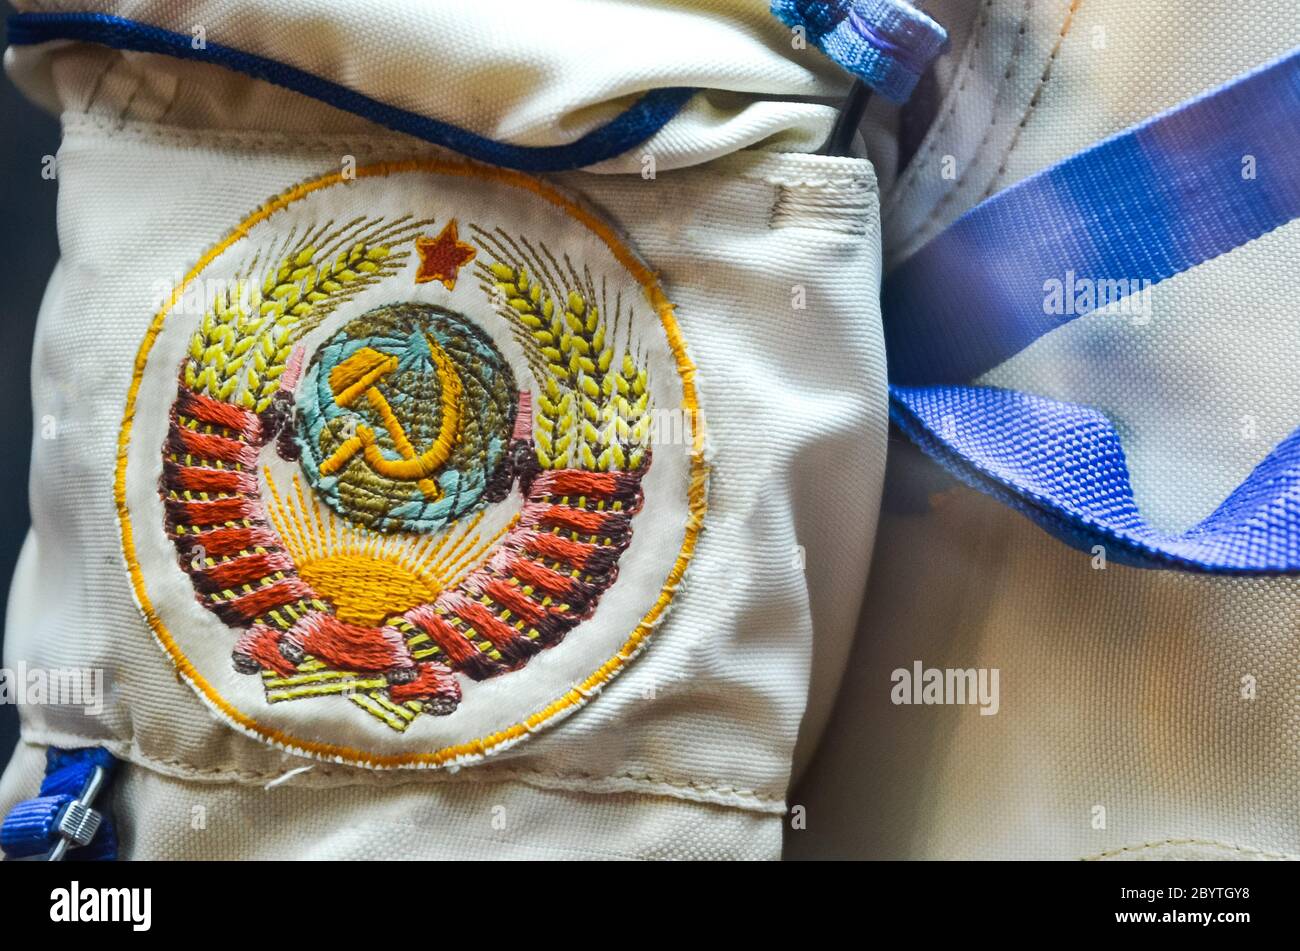 MOSCOW, RUSSIA - MAY 20, 2019: National emblem USSR on the space suit Sokol Stock Photo